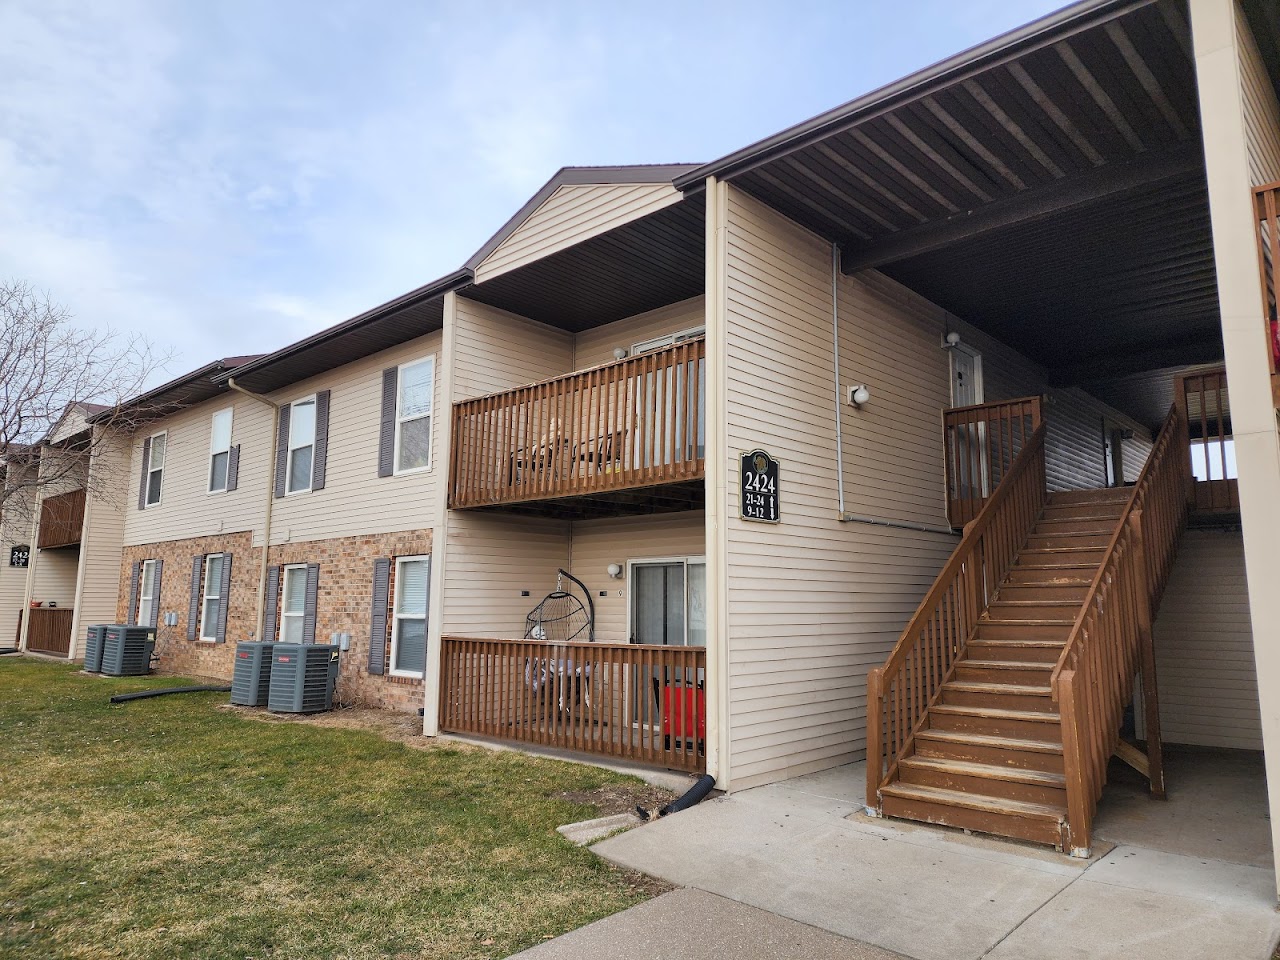 Photo of SYCAMORE APTS. Affordable housing located at 2416 PARK AVE MUSCATINE, IA 52761